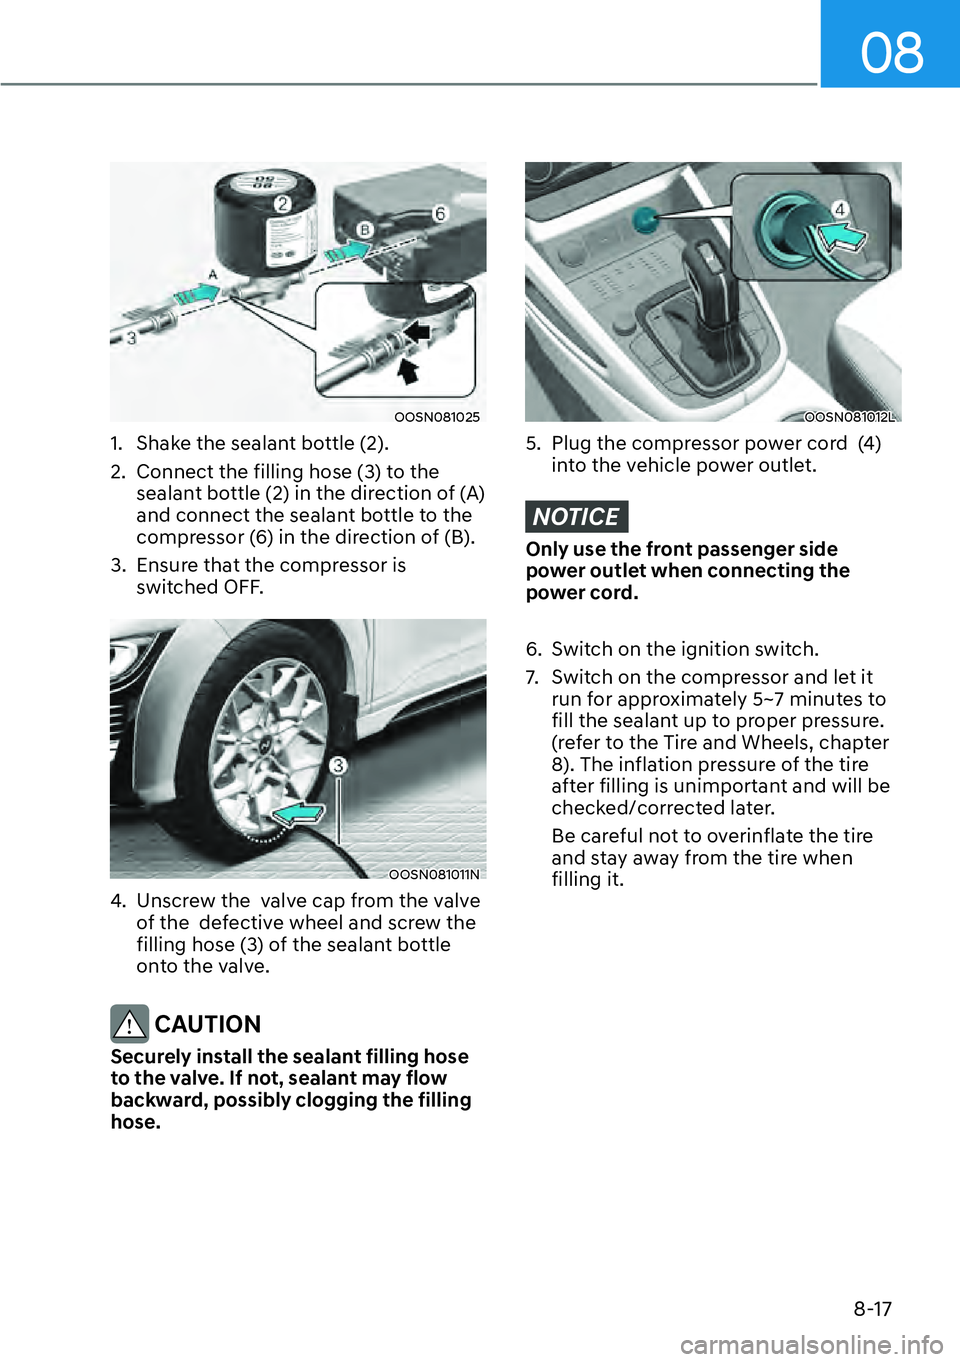 HYUNDAI KONA 2023  Owners Manual 08
8-17
OOSN081025
1.  Shake the sealant bottle (2).
2.  Connect the filling hose (3) to the sealant bottle (2) in the direction of (A) 
and connect the sealant bottle to the 
compressor (6) in the di